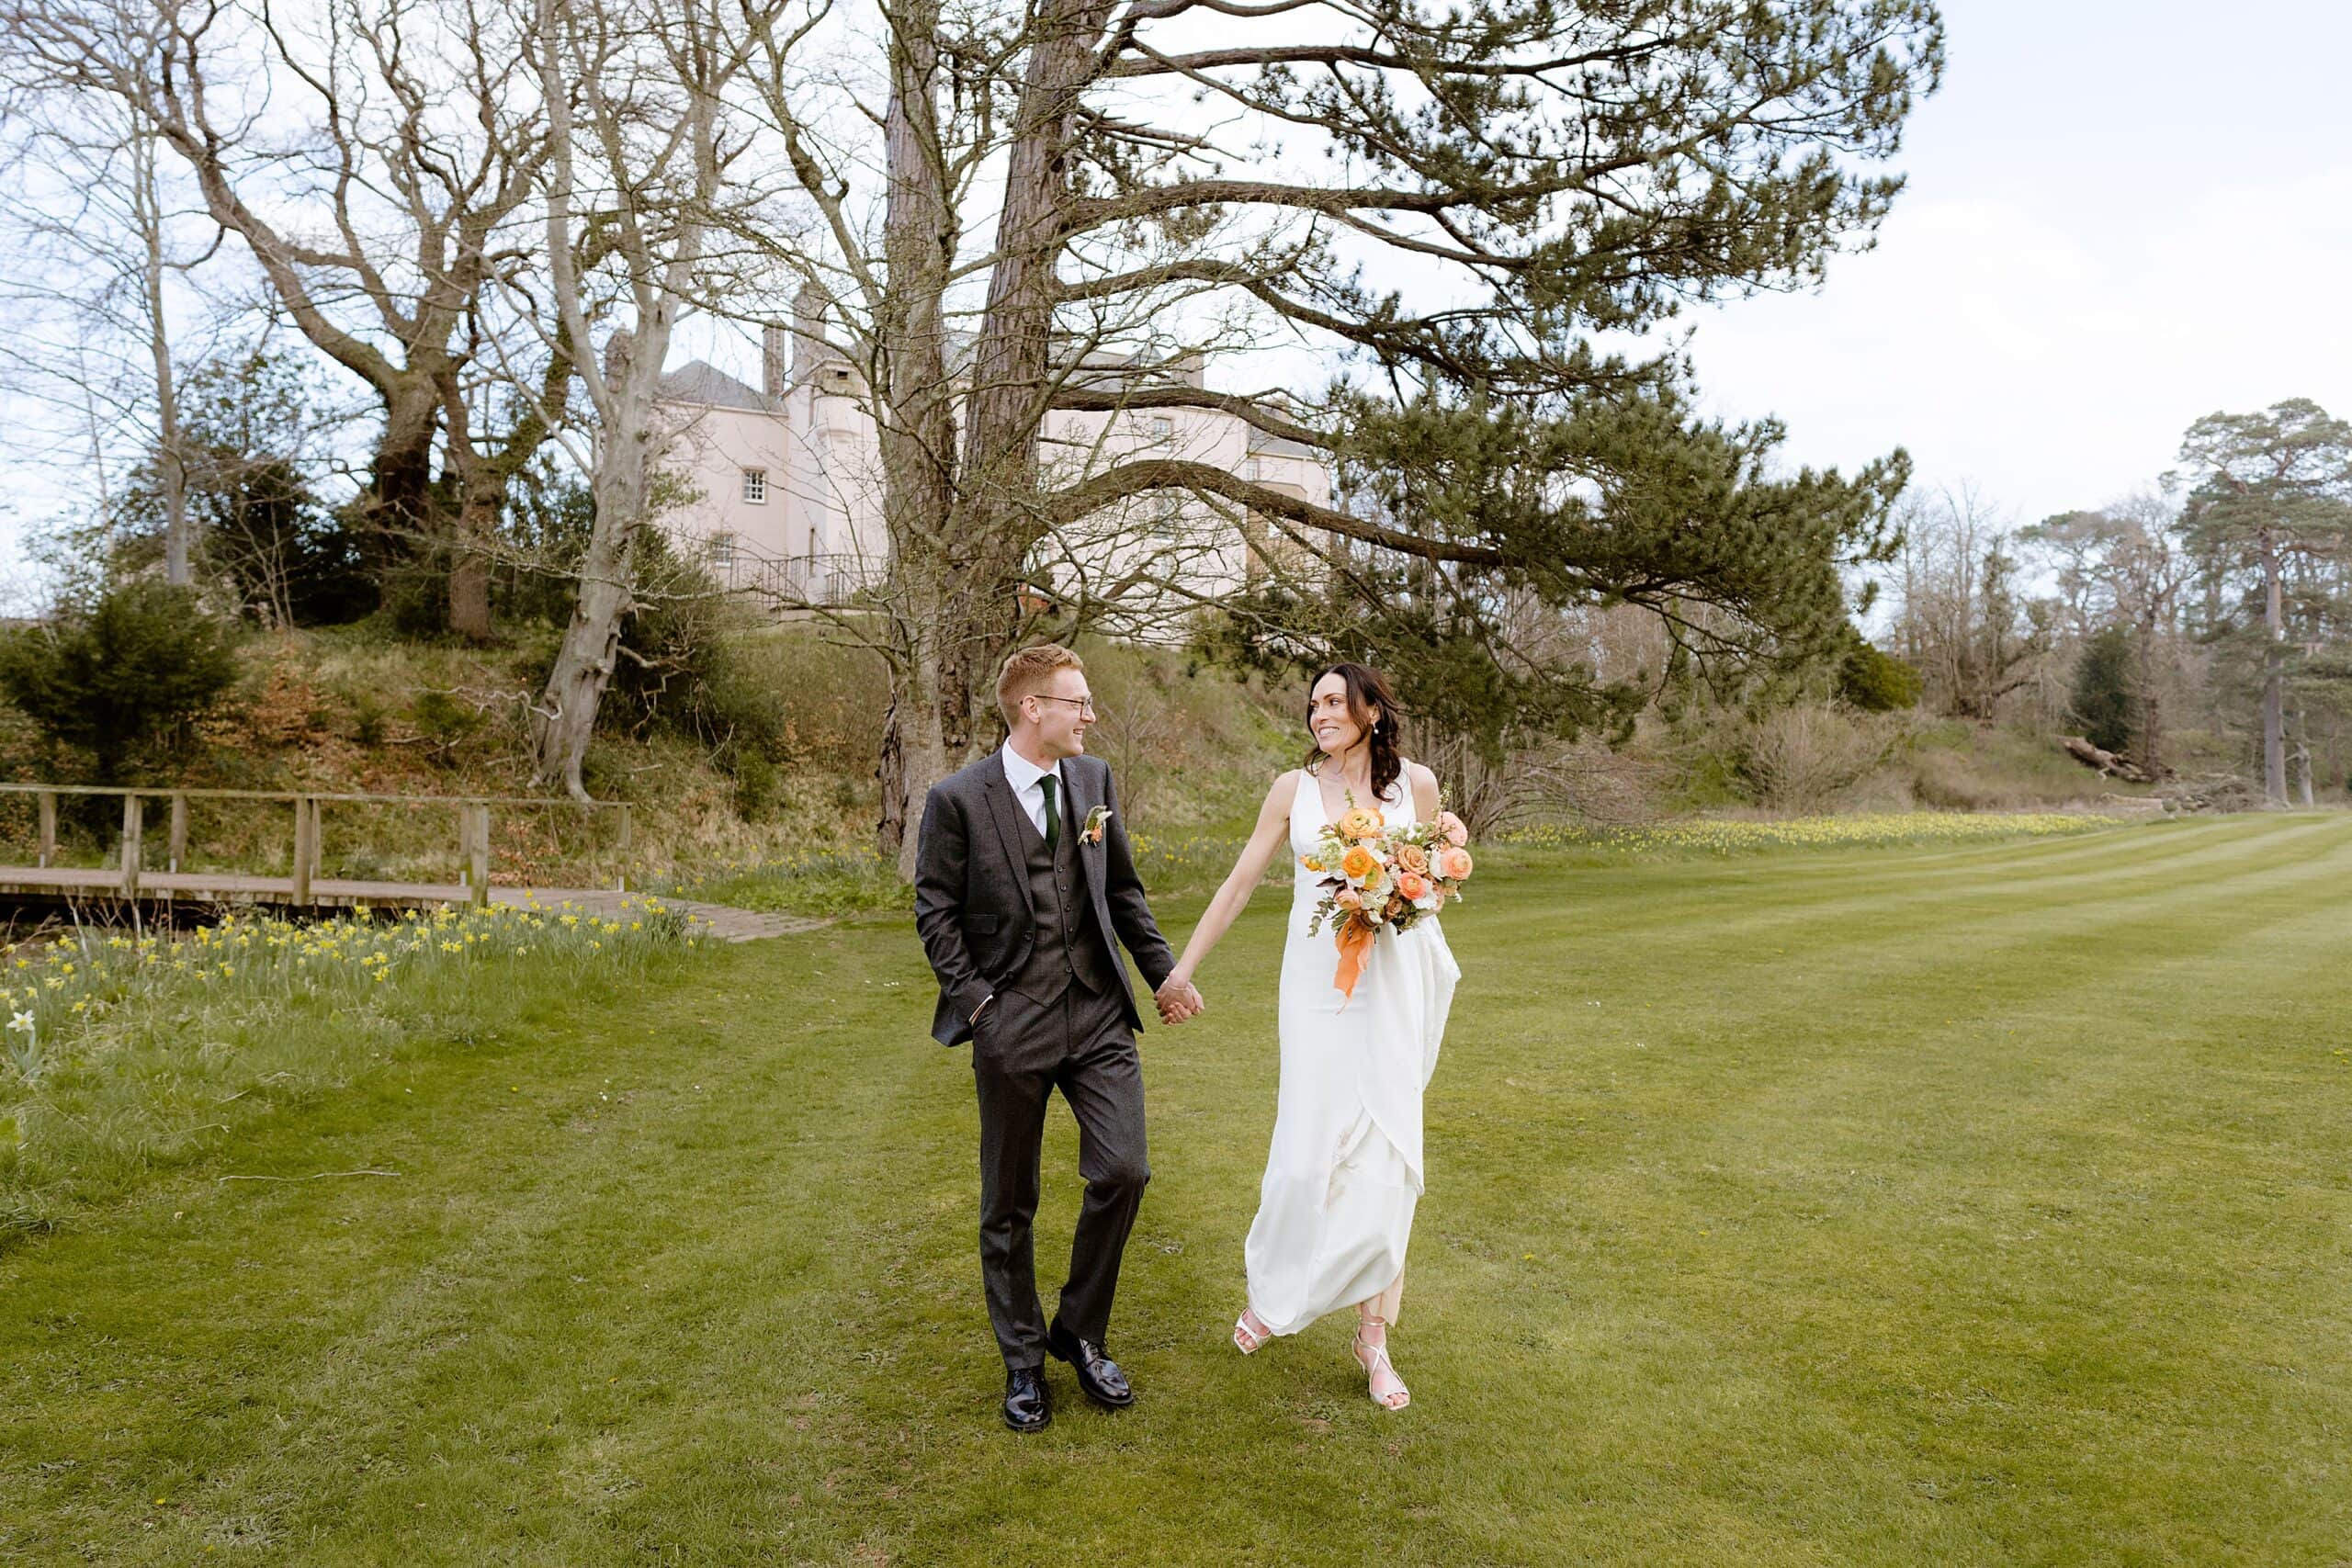 the bride and groom hold hands and smile at each other as they walk on a lawn with trees and a farm building in the background following their unusual wedding venues east lothian wedding ceremony near edinburgh scotland